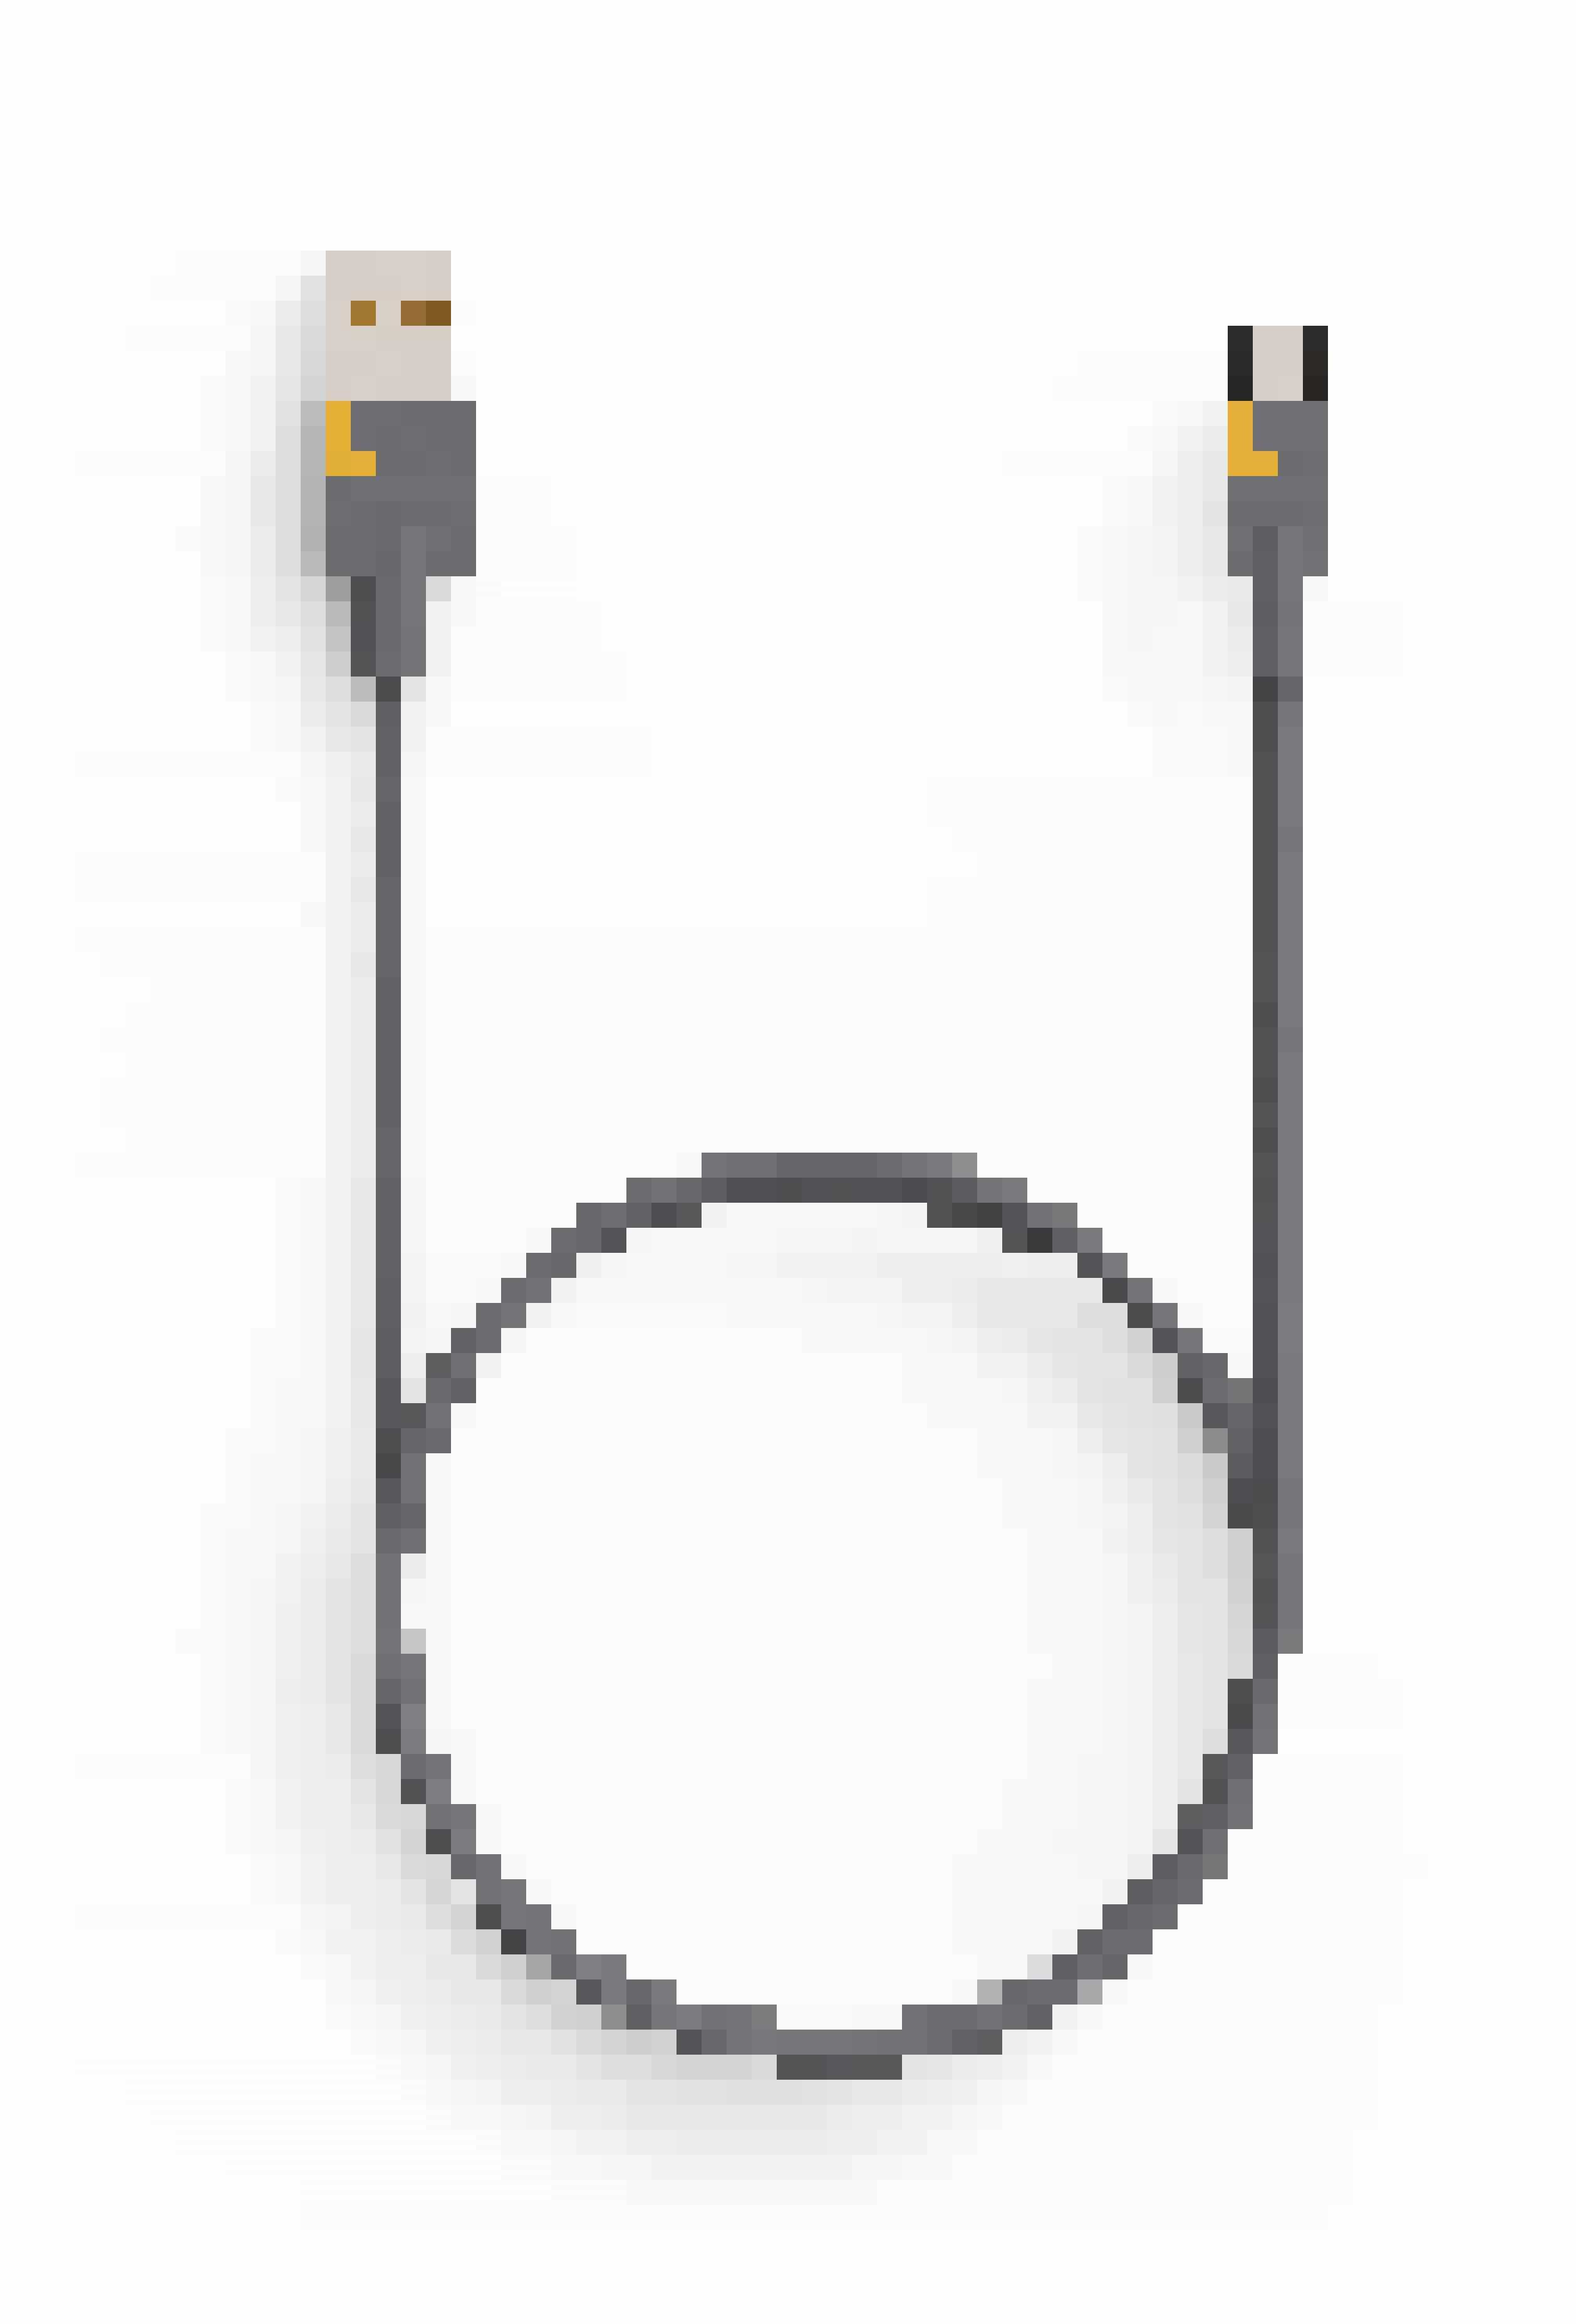 USB-A to USB-C Cable Design and render for teenage engineering 2017